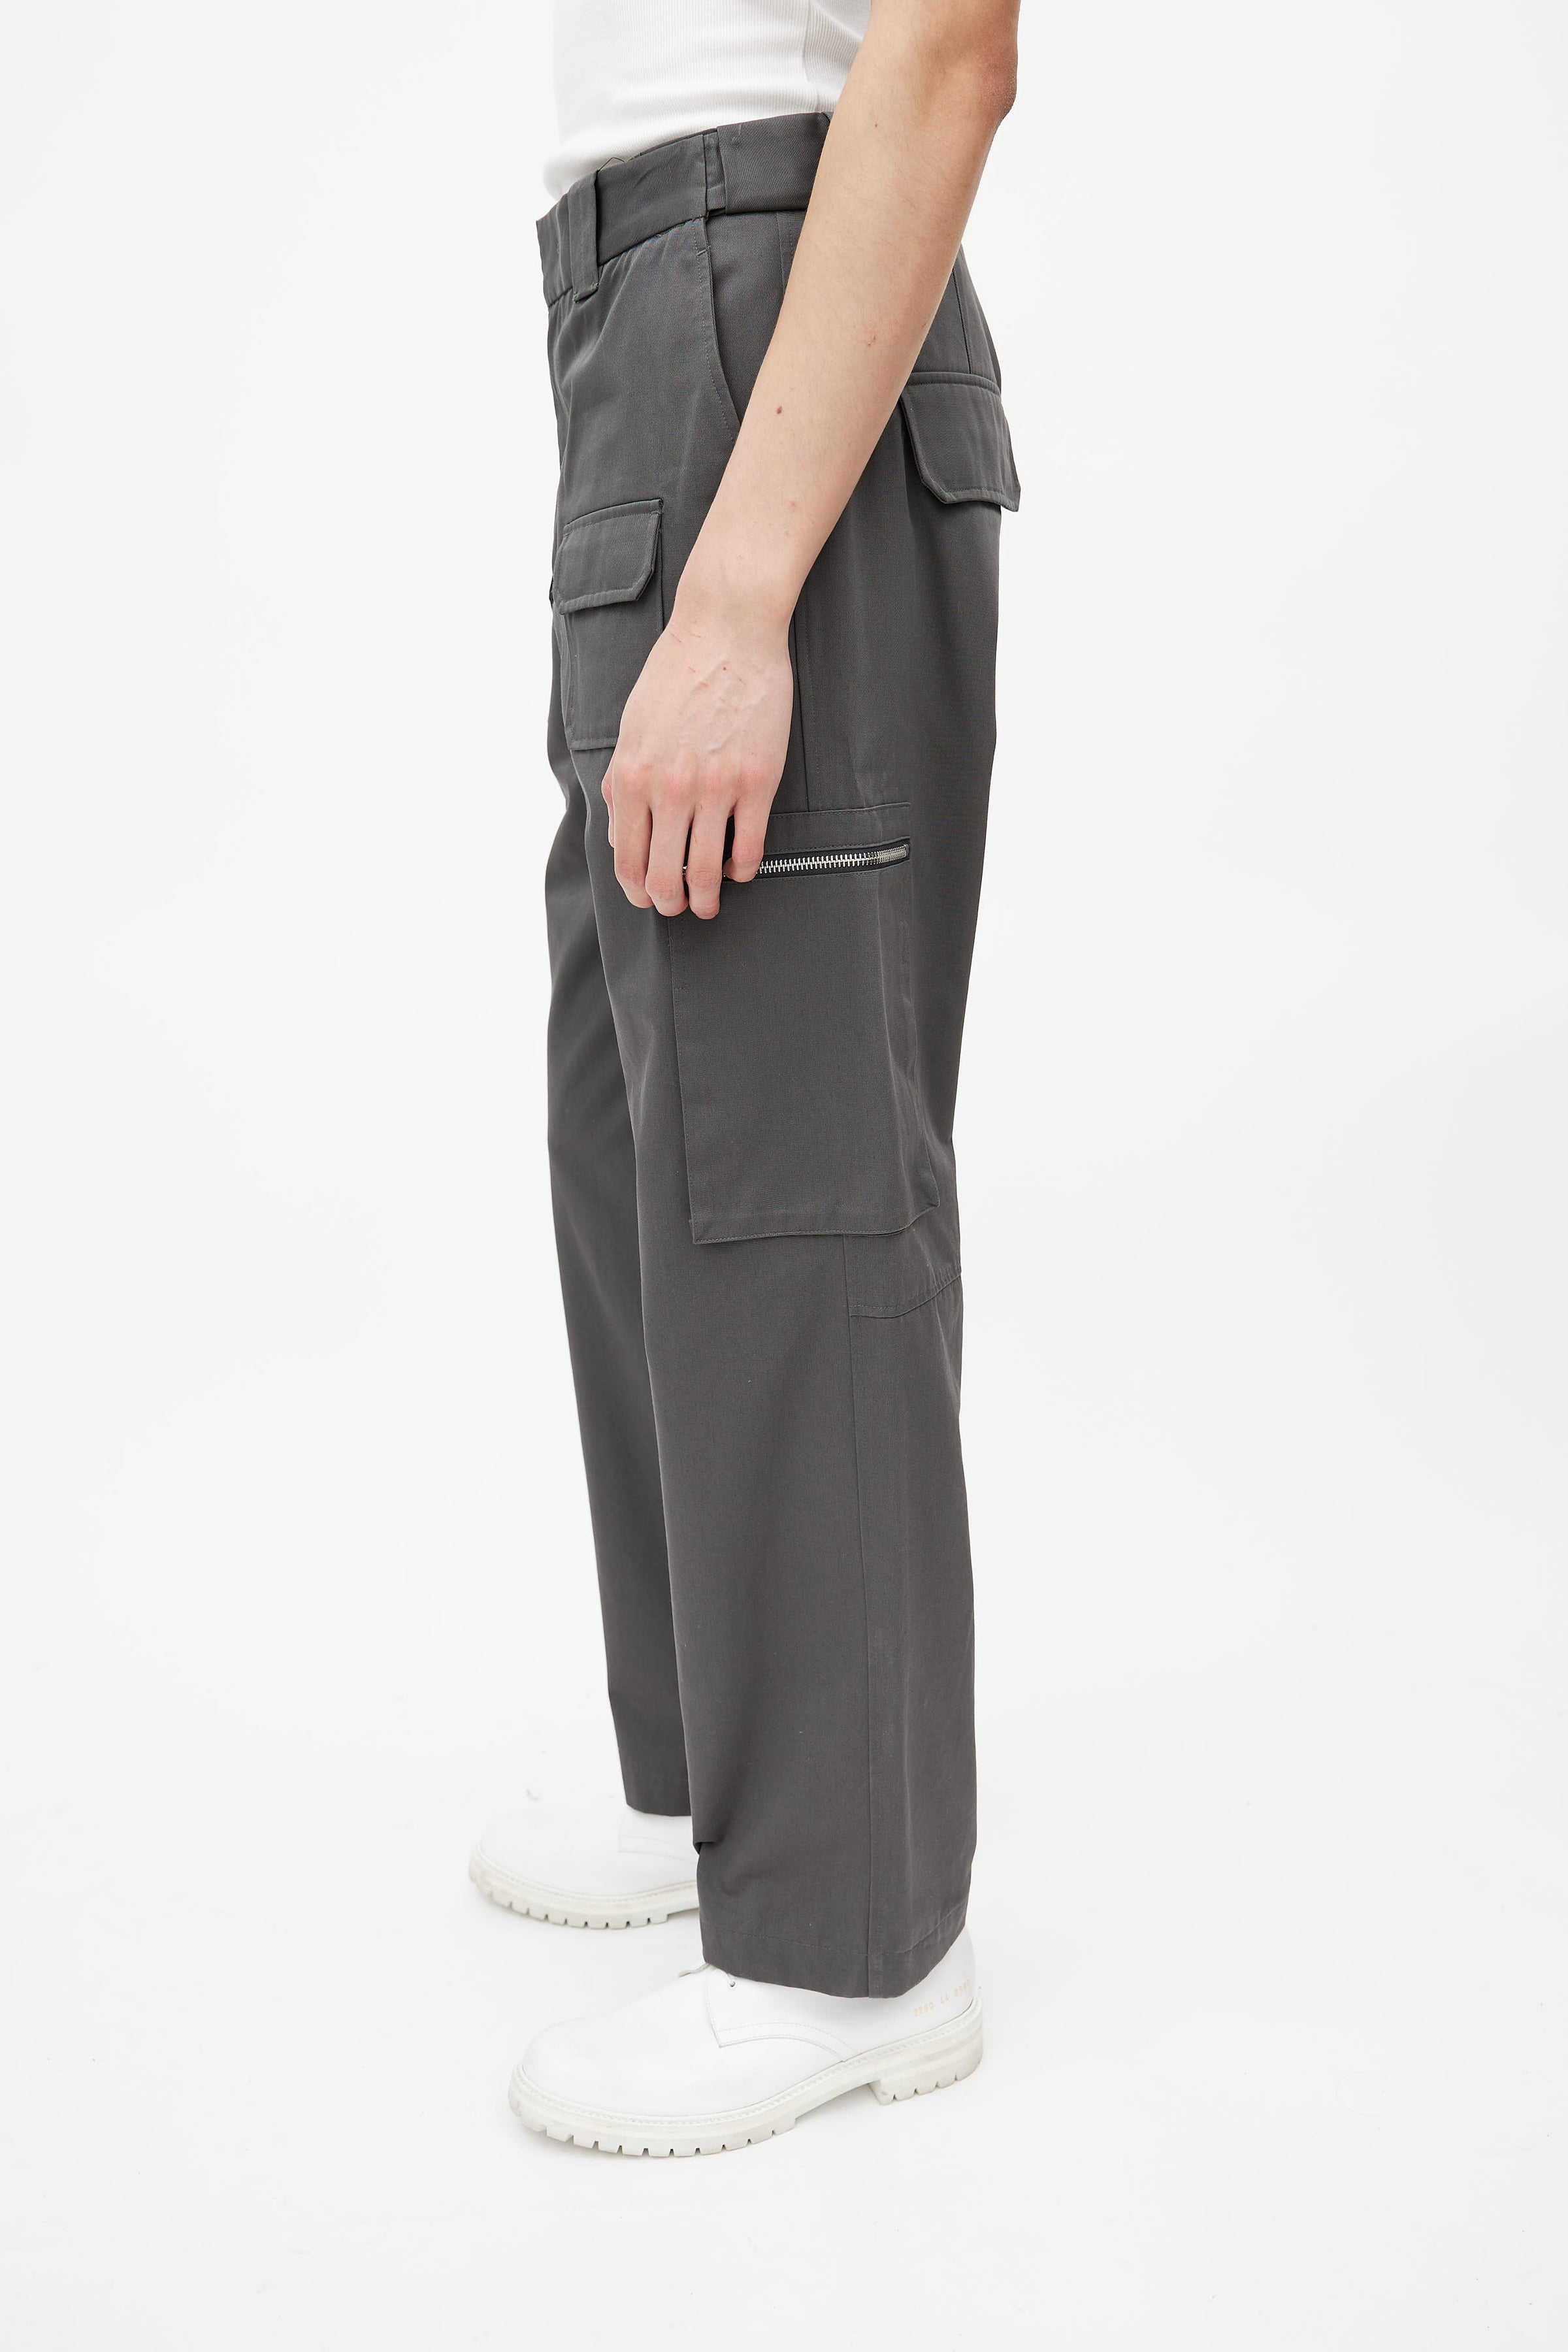 Helmut Lang high-waisted Cargo Trousers - Farfetch